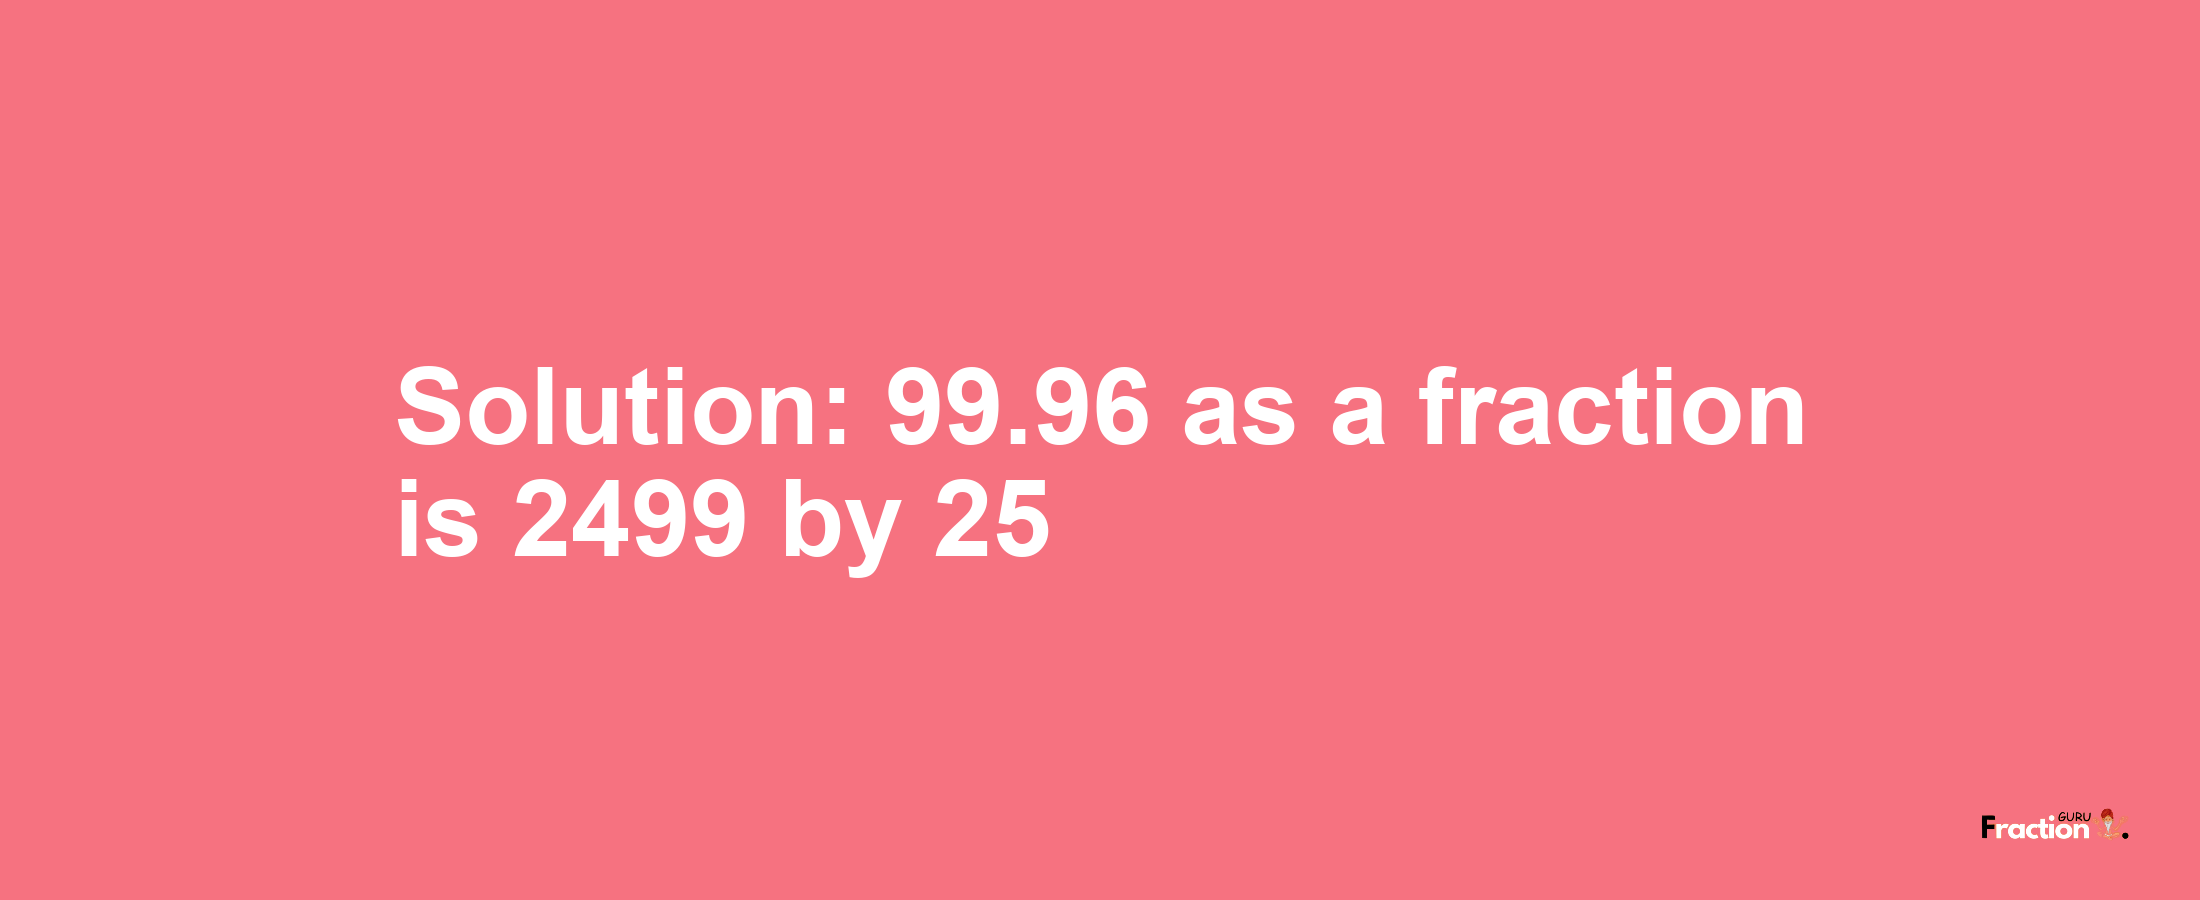 Solution:99.96 as a fraction is 2499/25